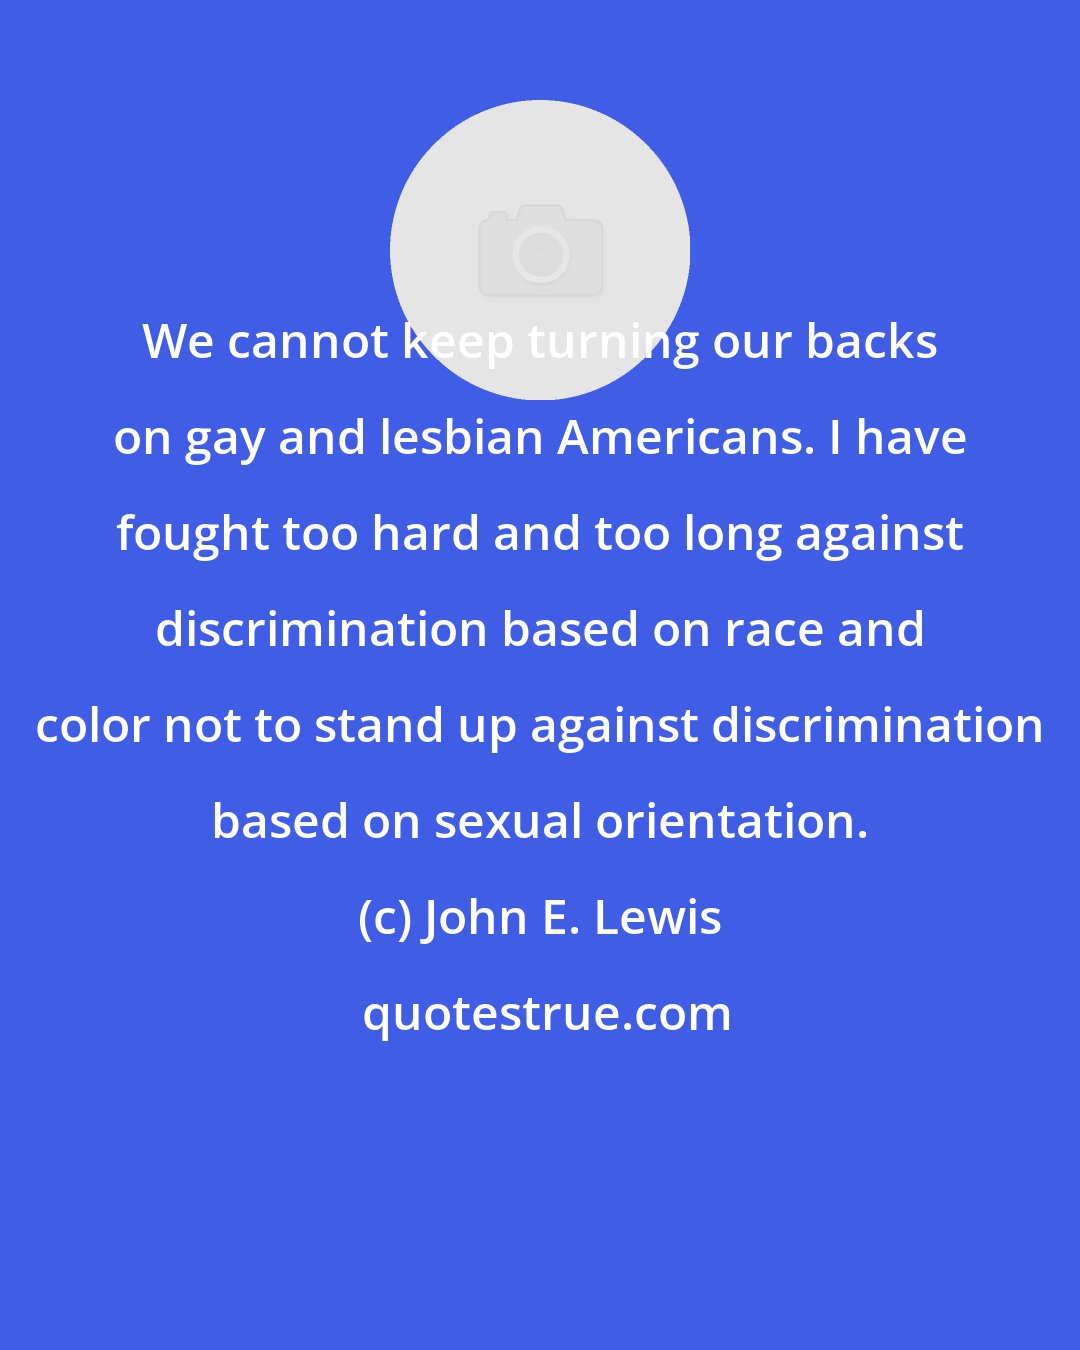 John E. Lewis: We cannot keep turning our backs on gay and lesbian Americans. I have fought too hard and too long against discrimination based on race and color not to stand up against discrimination based on sexual orientation.